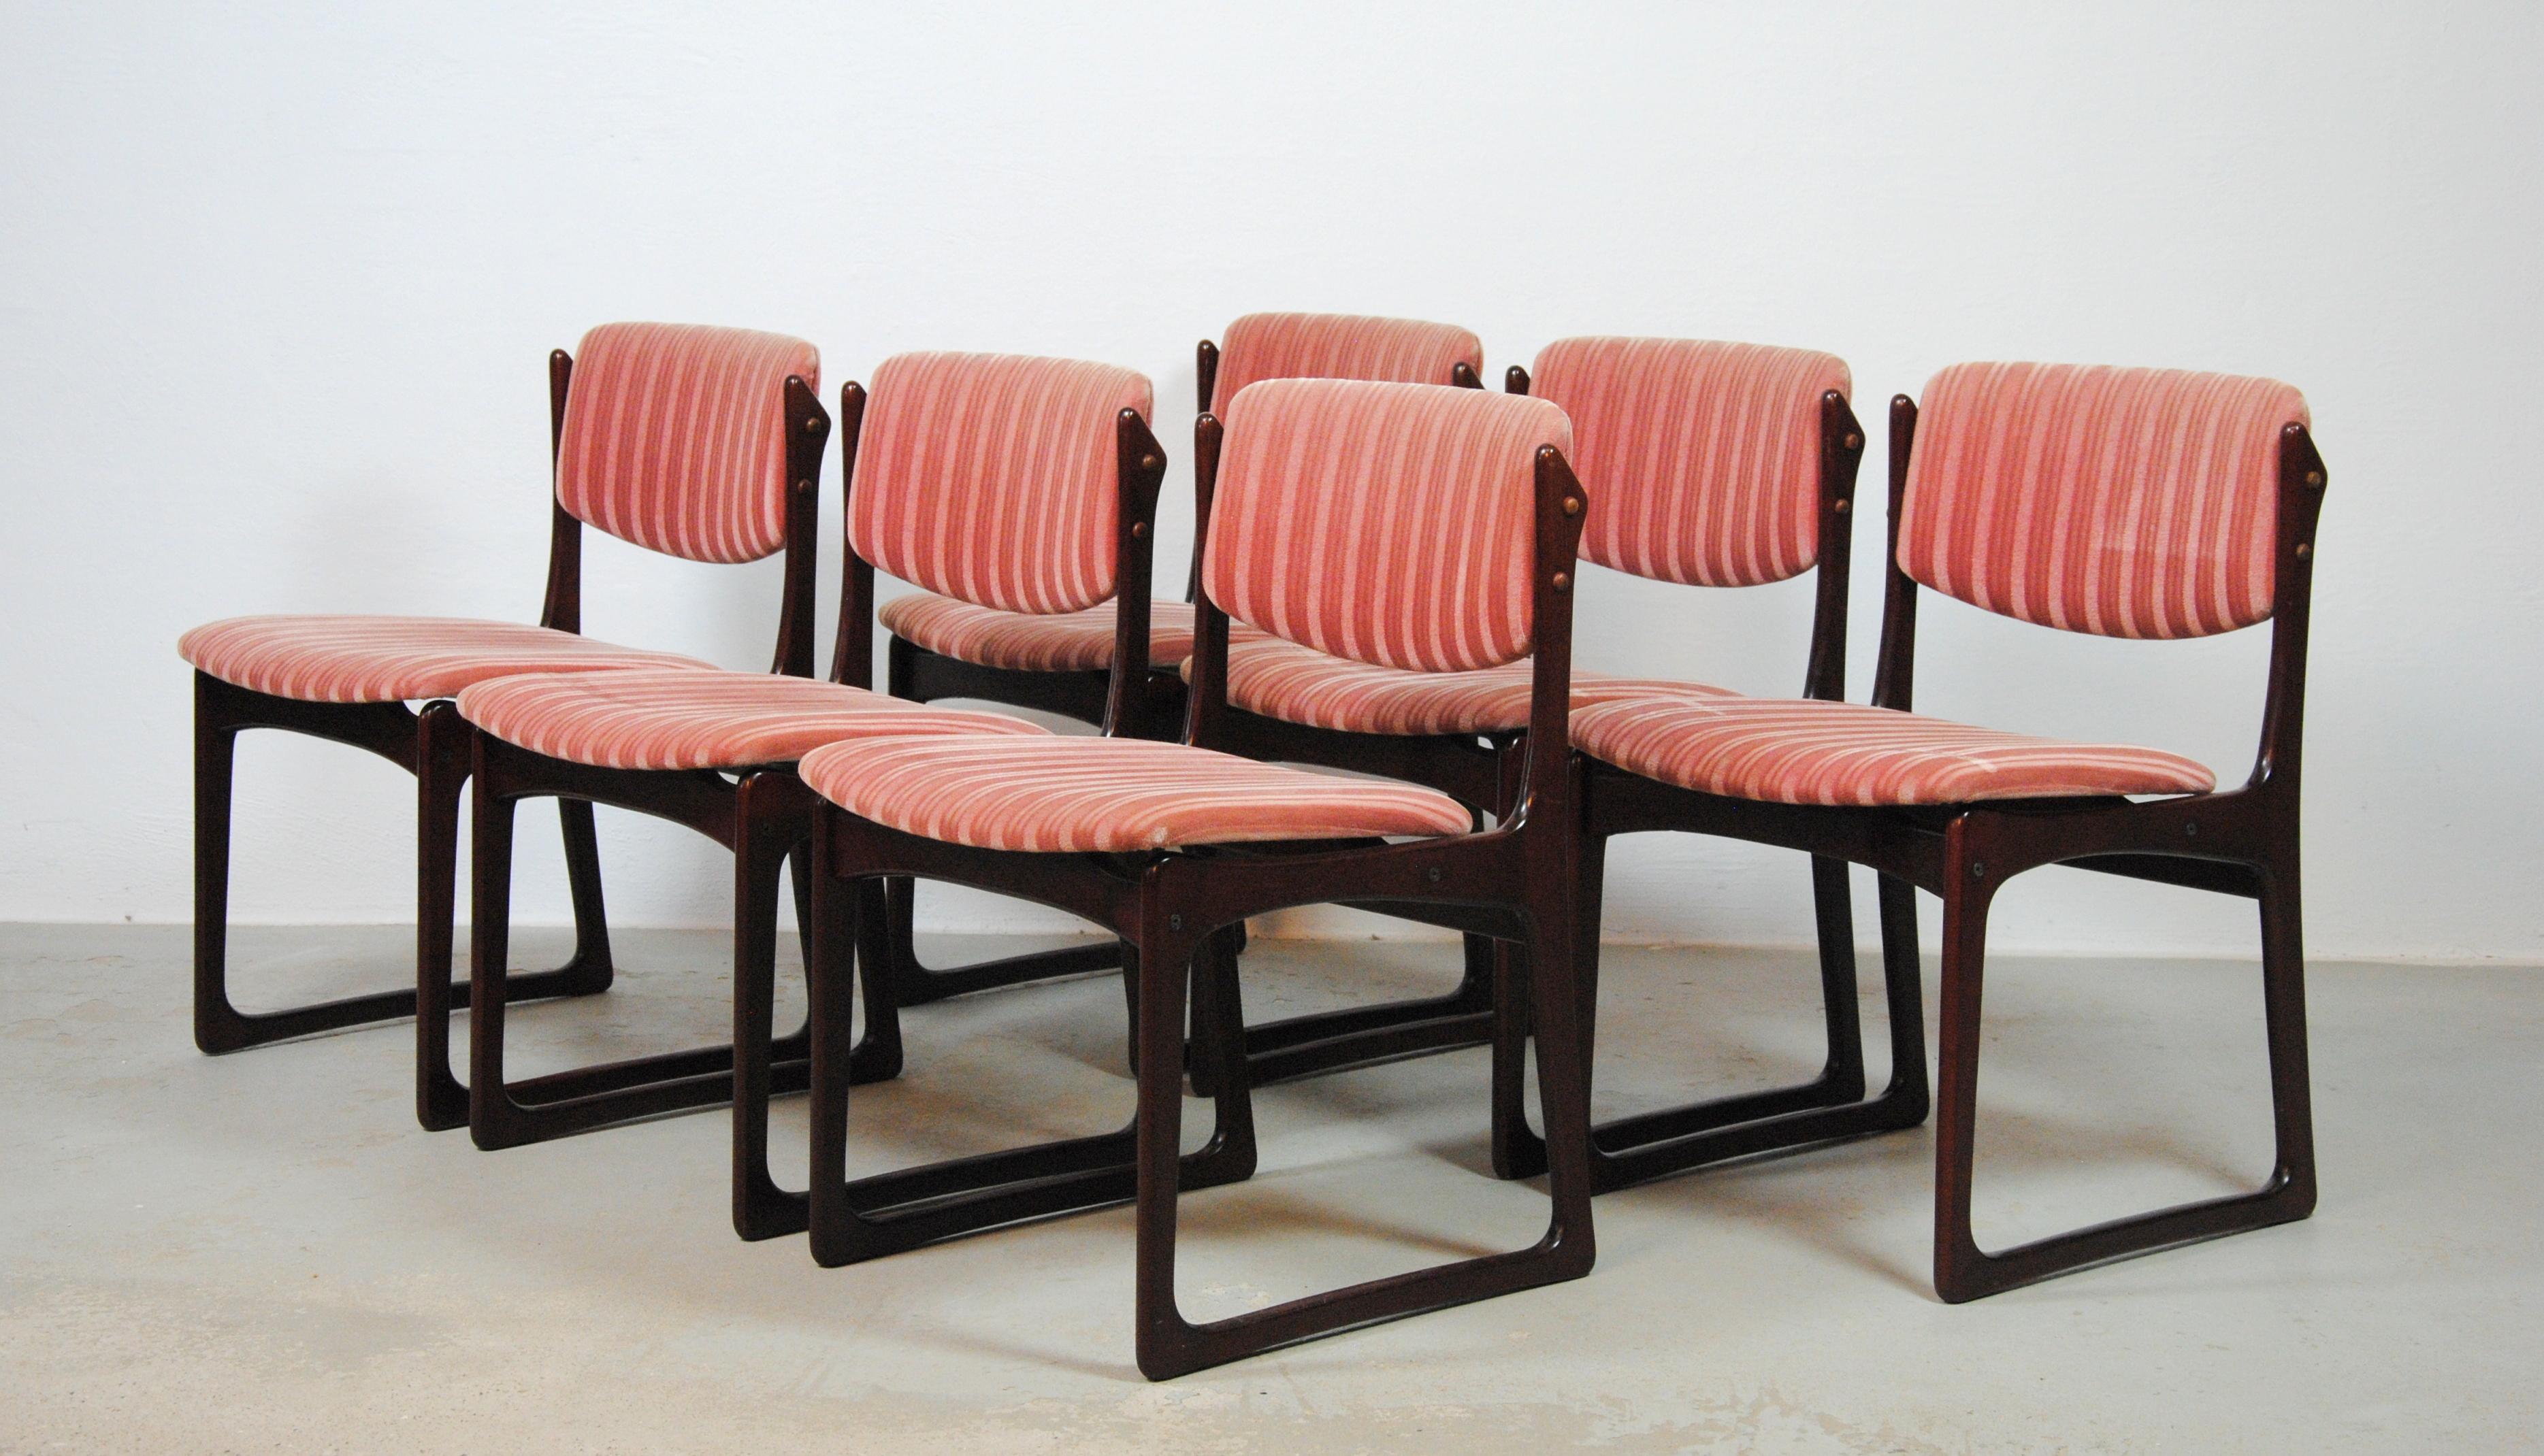 1970's Poul Hundevad six danish dining chairs in tanned oak and pink upholstery by Vamo Møbelfabrik Sønderborg

The frames of the chairs have been checked and refinished by our cabinetmaker to ensure that they are in good condition.

We have not